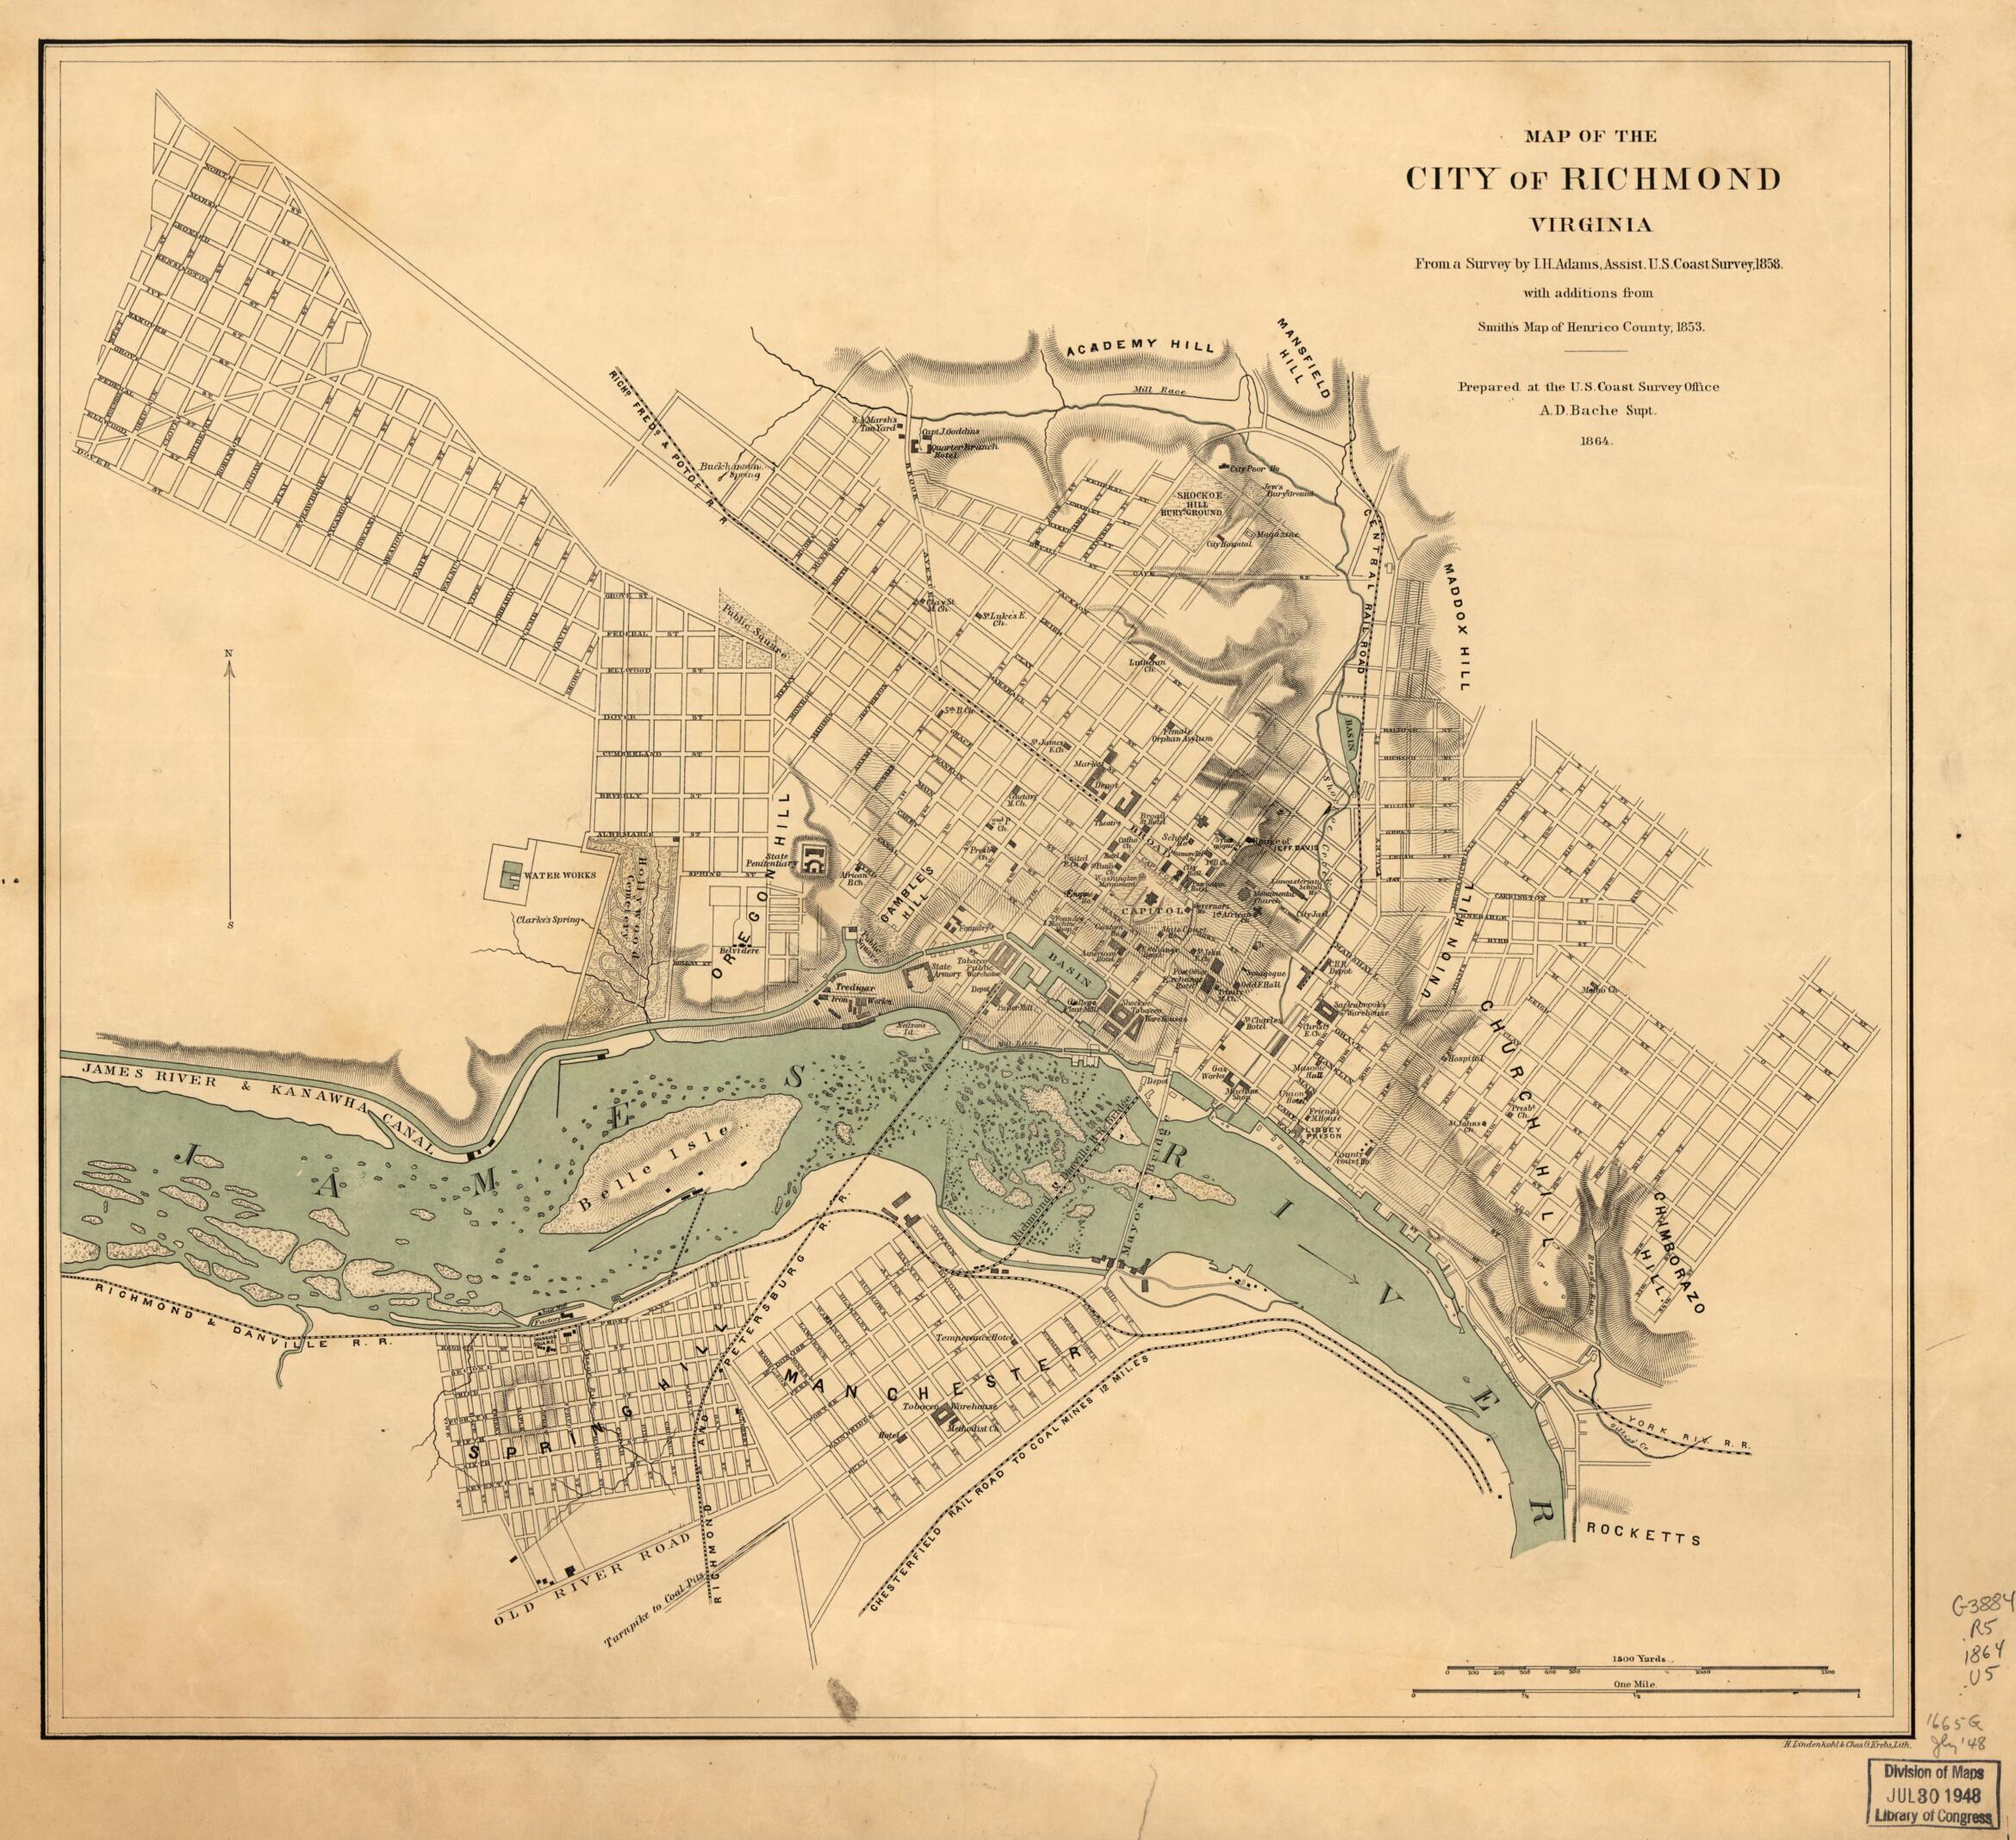 This old map of Map of the City of Richmond, Virginia from 1864 was created by  United States Coast Survey in 1864